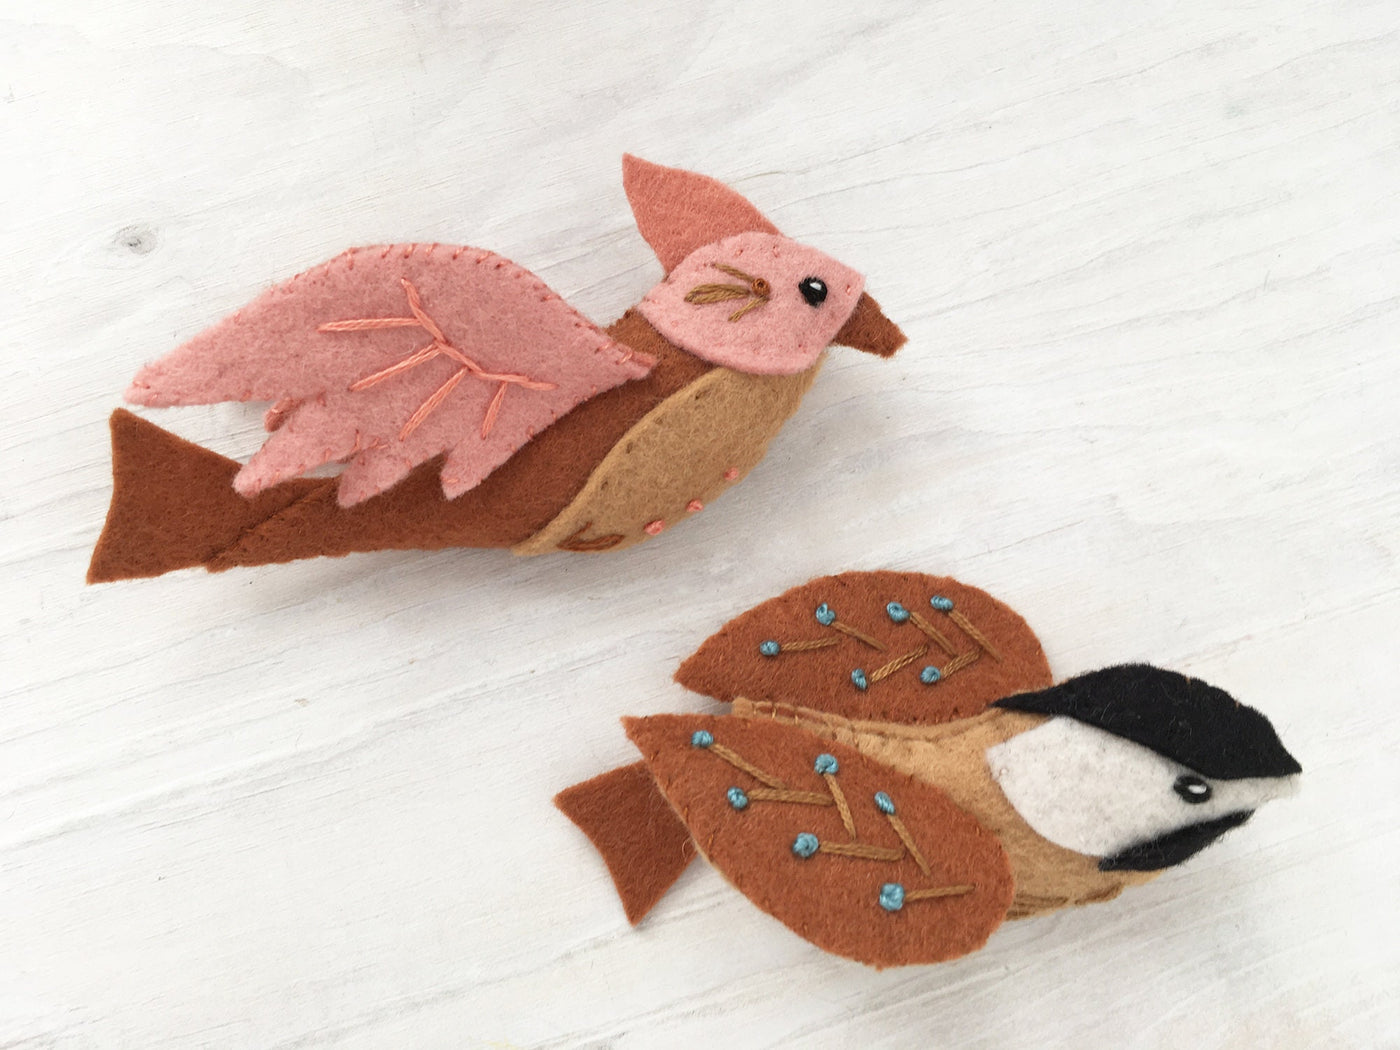 Birds and Feathers felt animals Sewing Pattern